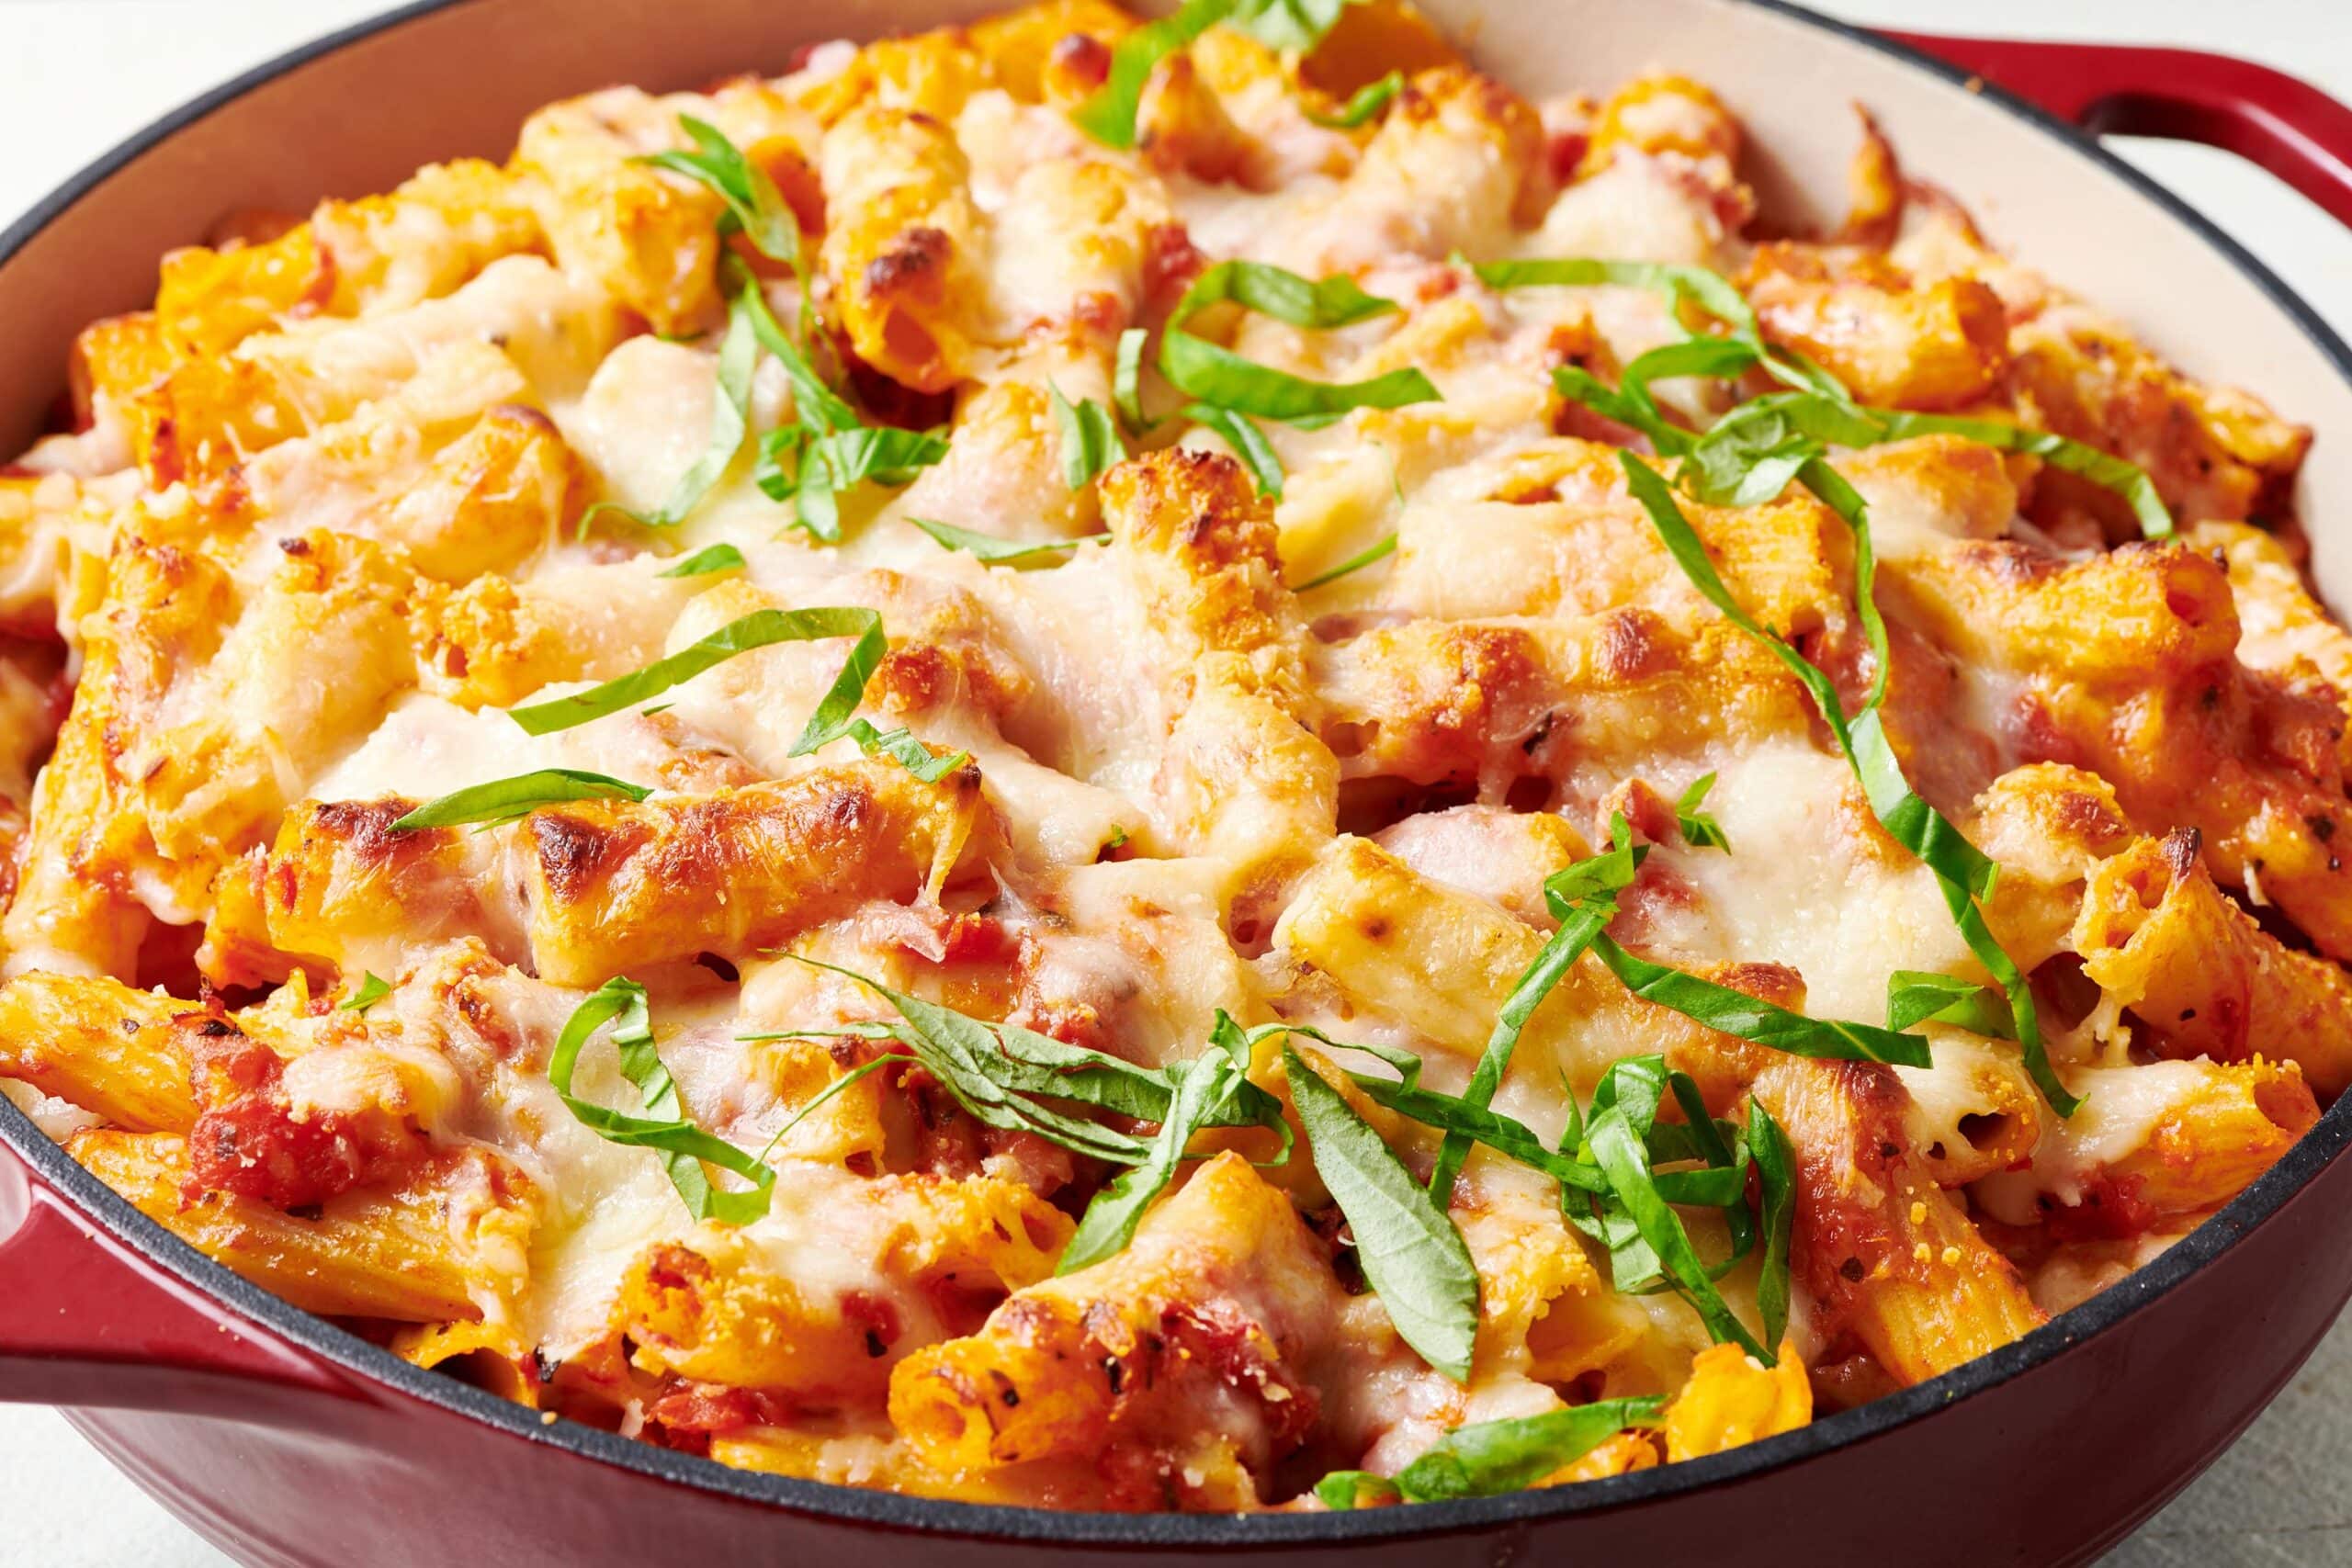 Baked Ziti topped with melted cheese and basil.